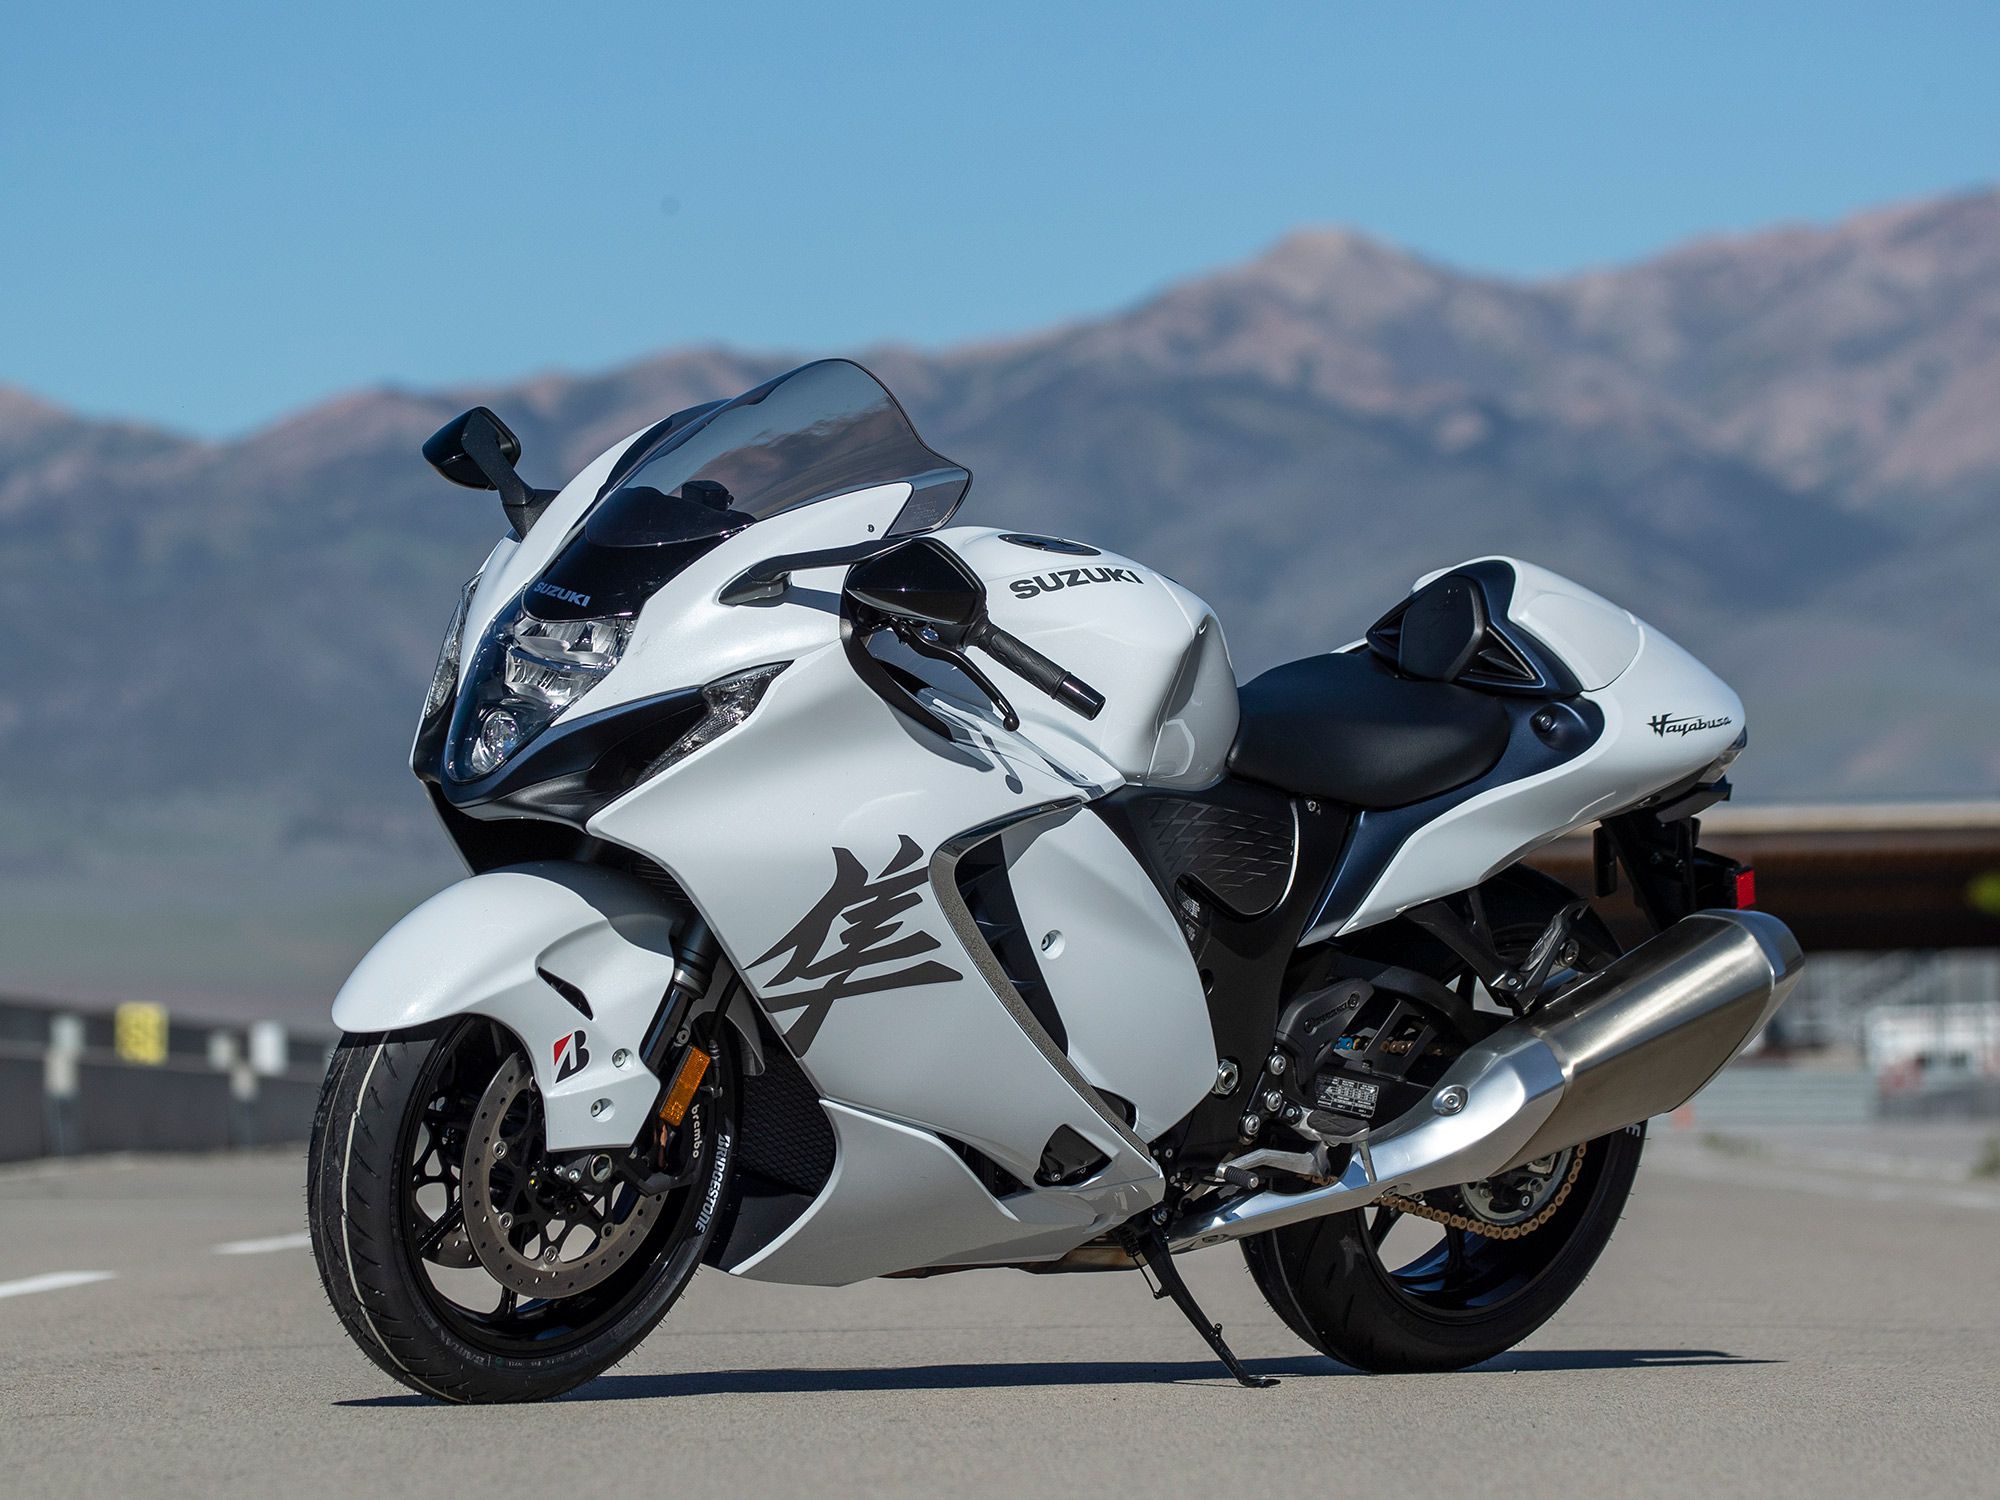 We are big fans of the sleeker and more modern appearance of Suzuki’s ‘22 Hayabusa hypersport bike.